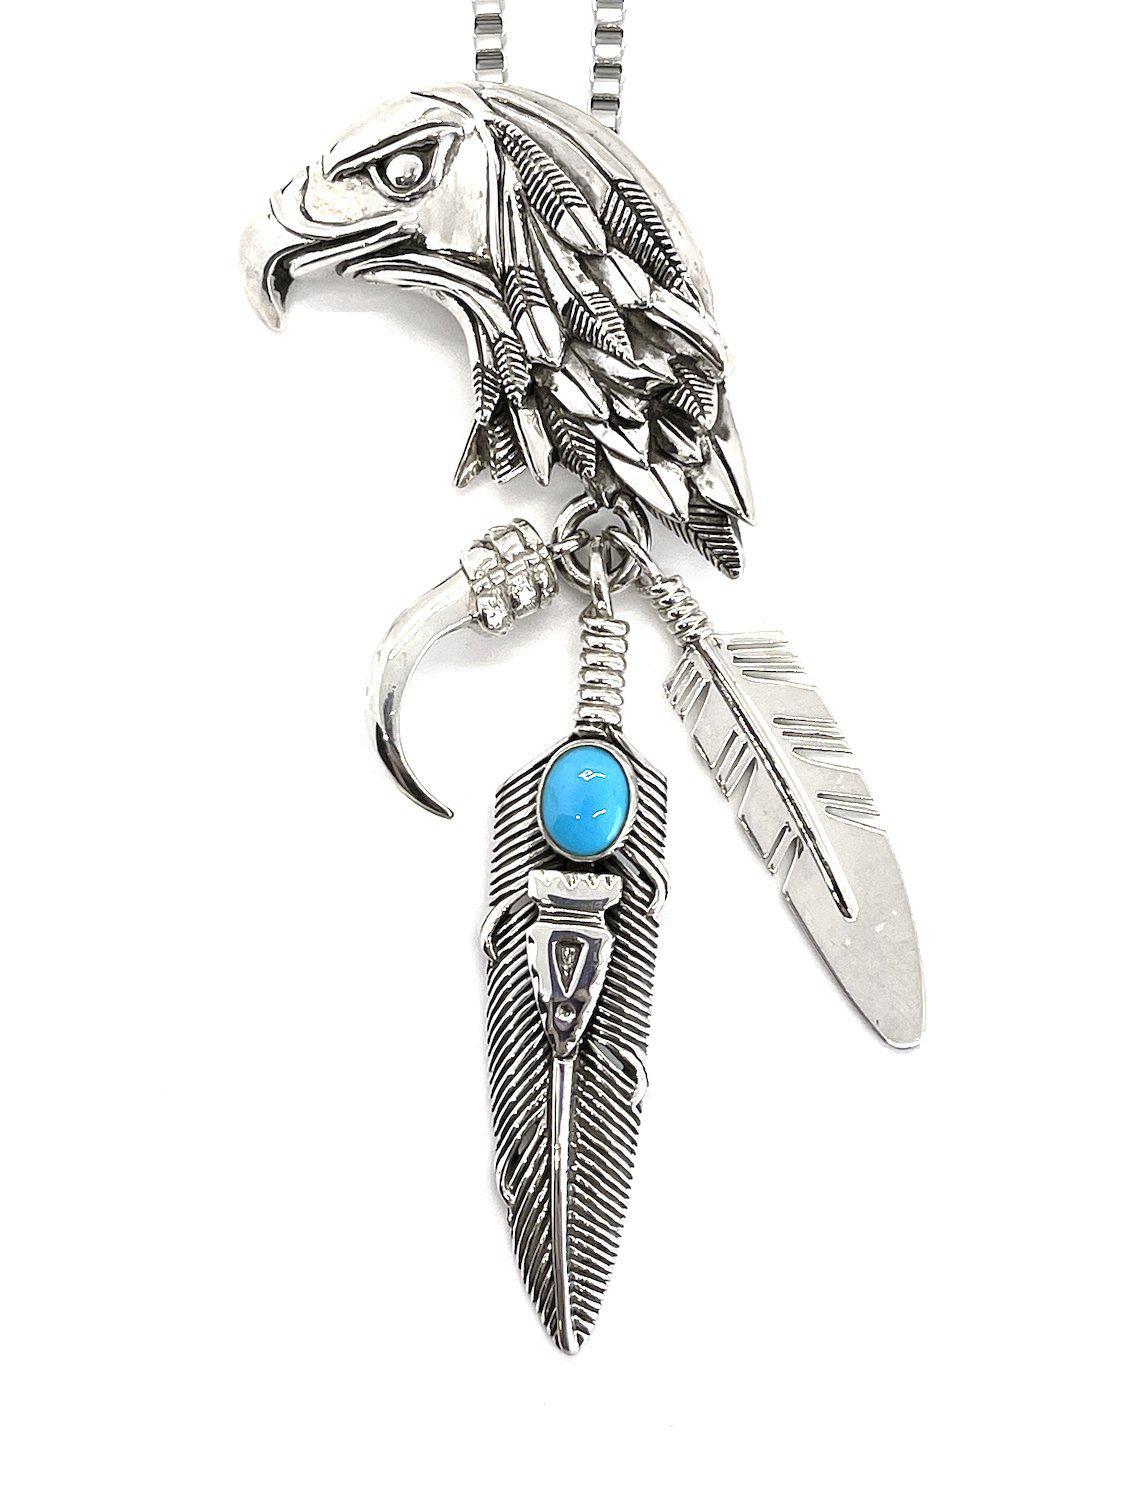 Eagle Head with Talon, Mystic Left, and Plume with Turquoise and Arrowhead-jewelry-Ray Tracey-Sorrel Sky Gallery